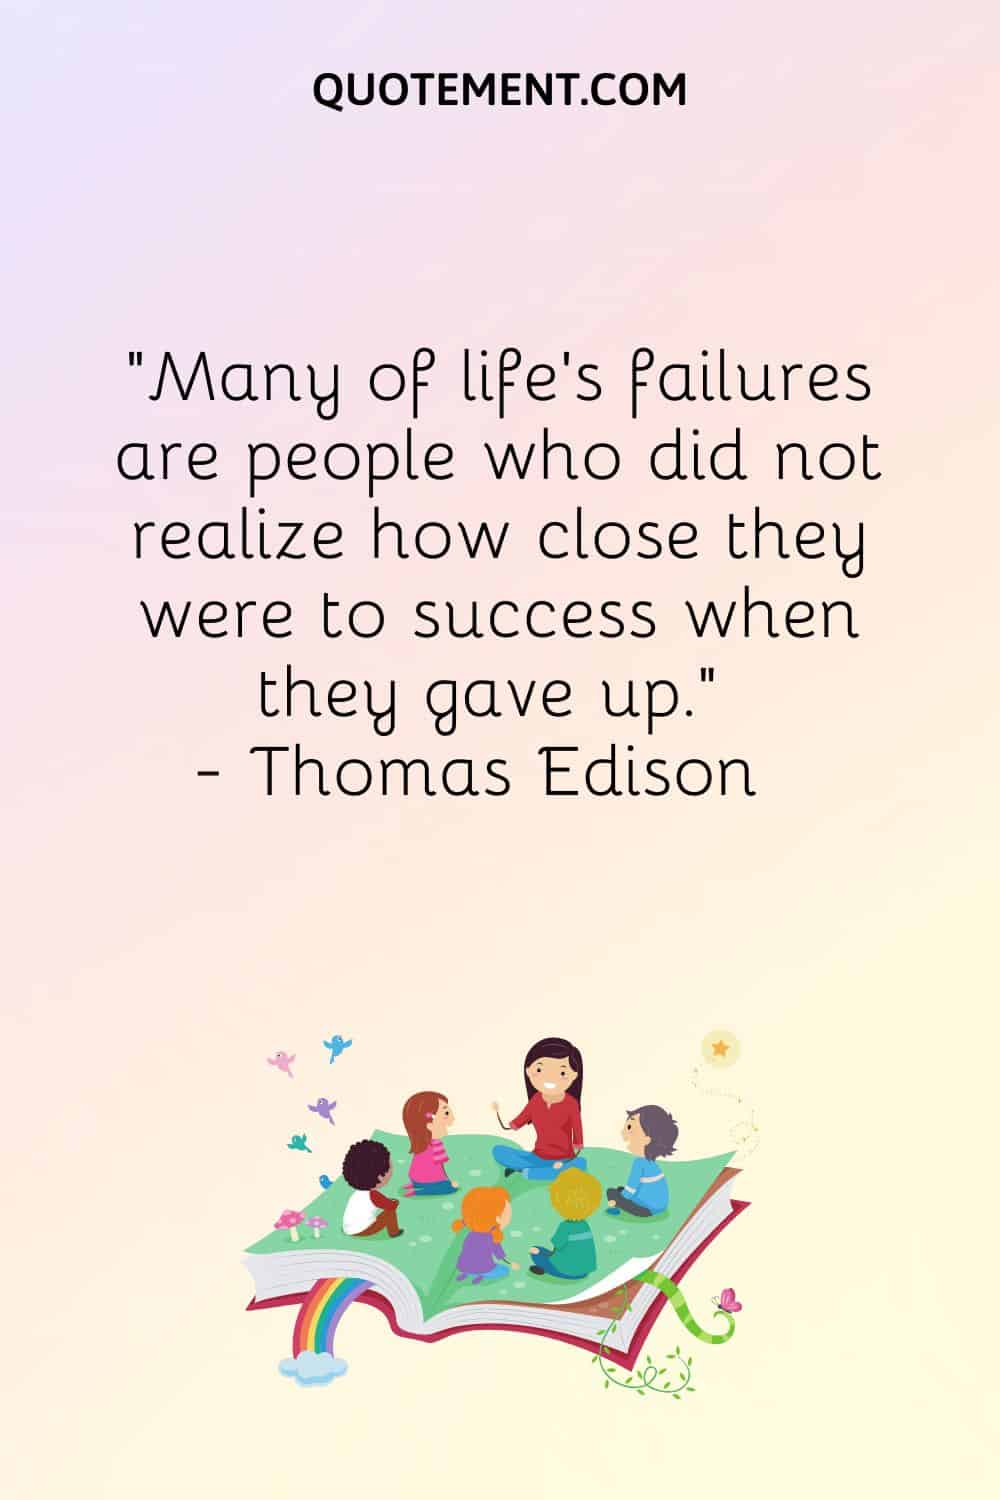 Many of life's failures are people who did not realize how close they were to success when they gave up